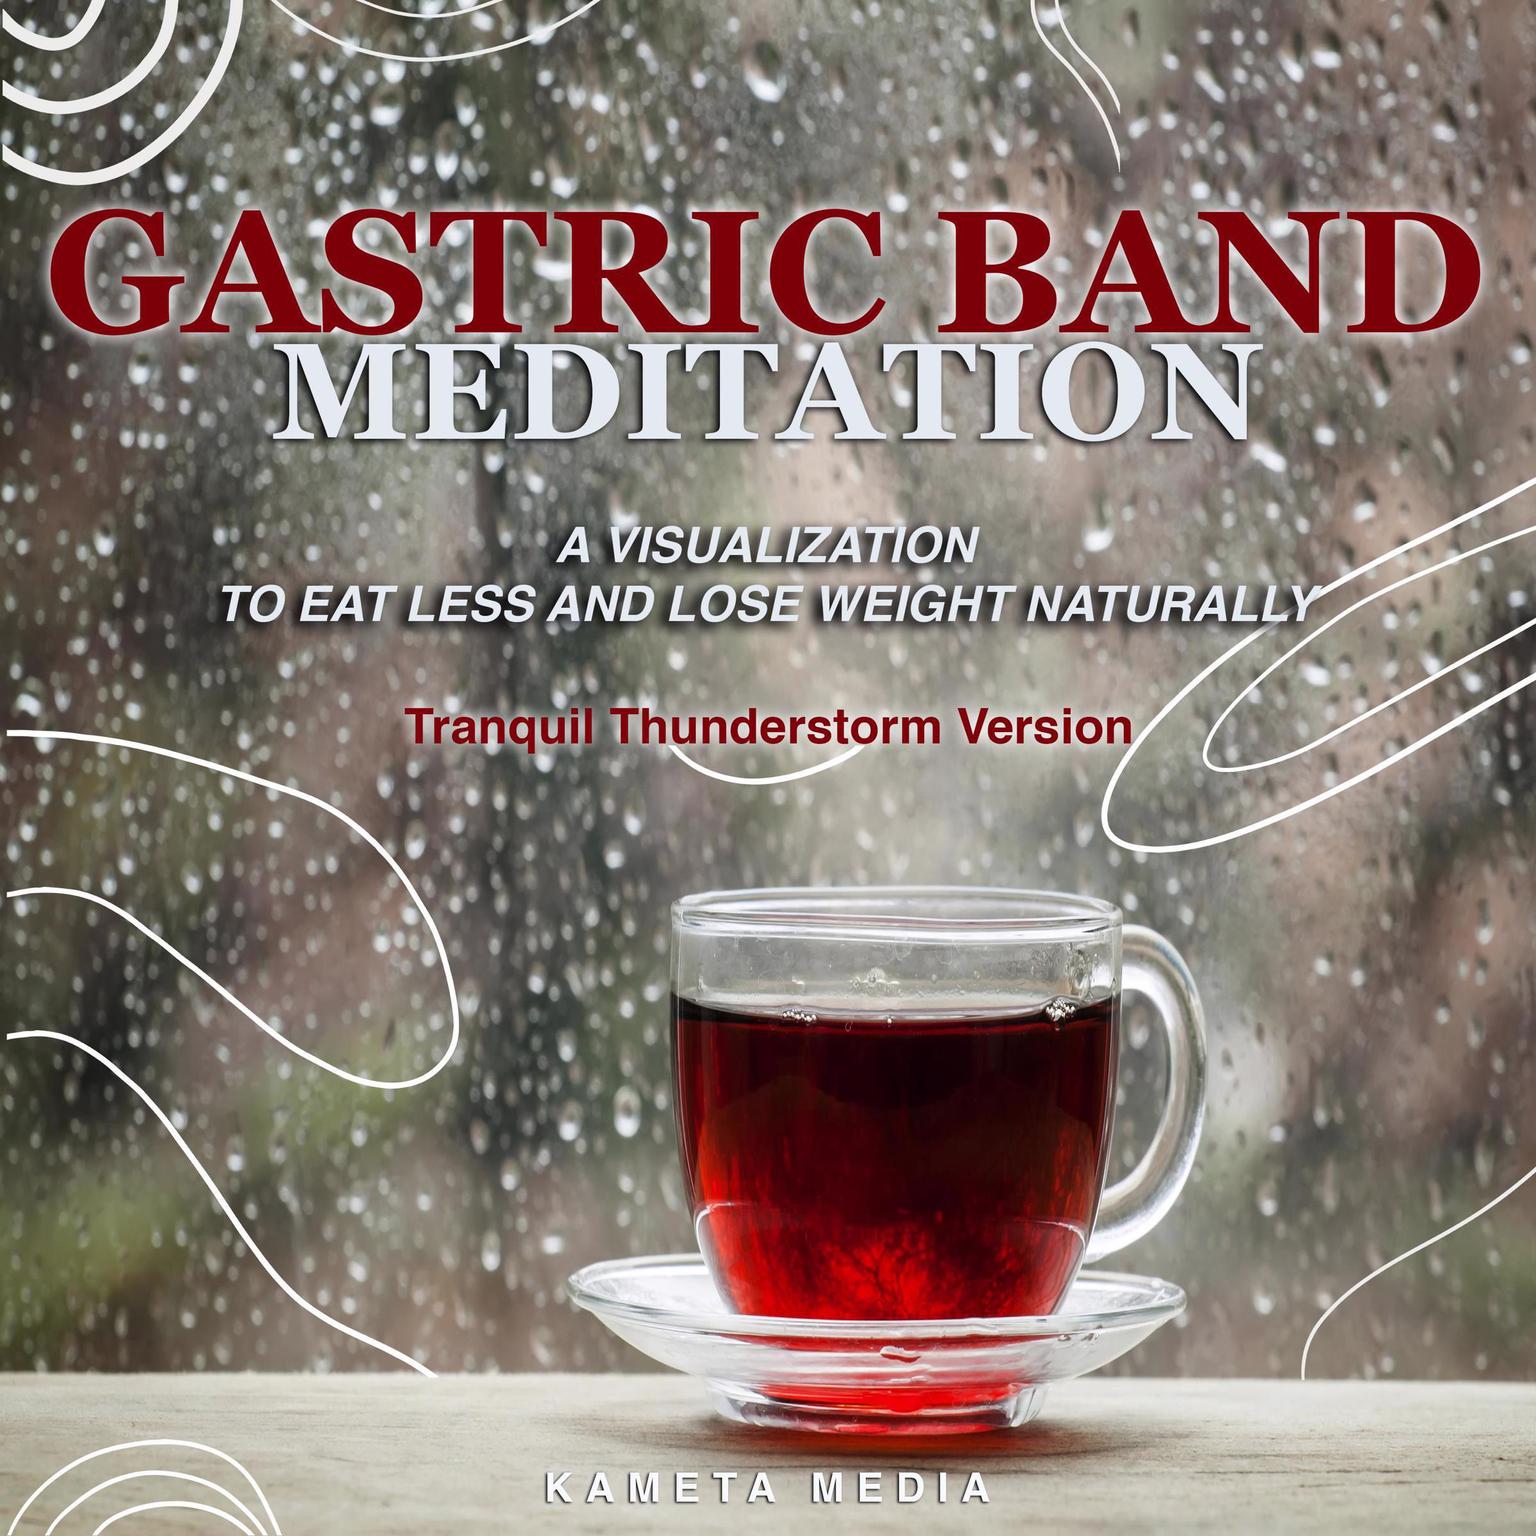 Gastric Band Meditation: A Visualization to Eat Less and Lose Weight Naturally (Tranquil Thunderstorm Version) Audiobook, by Kameta Media